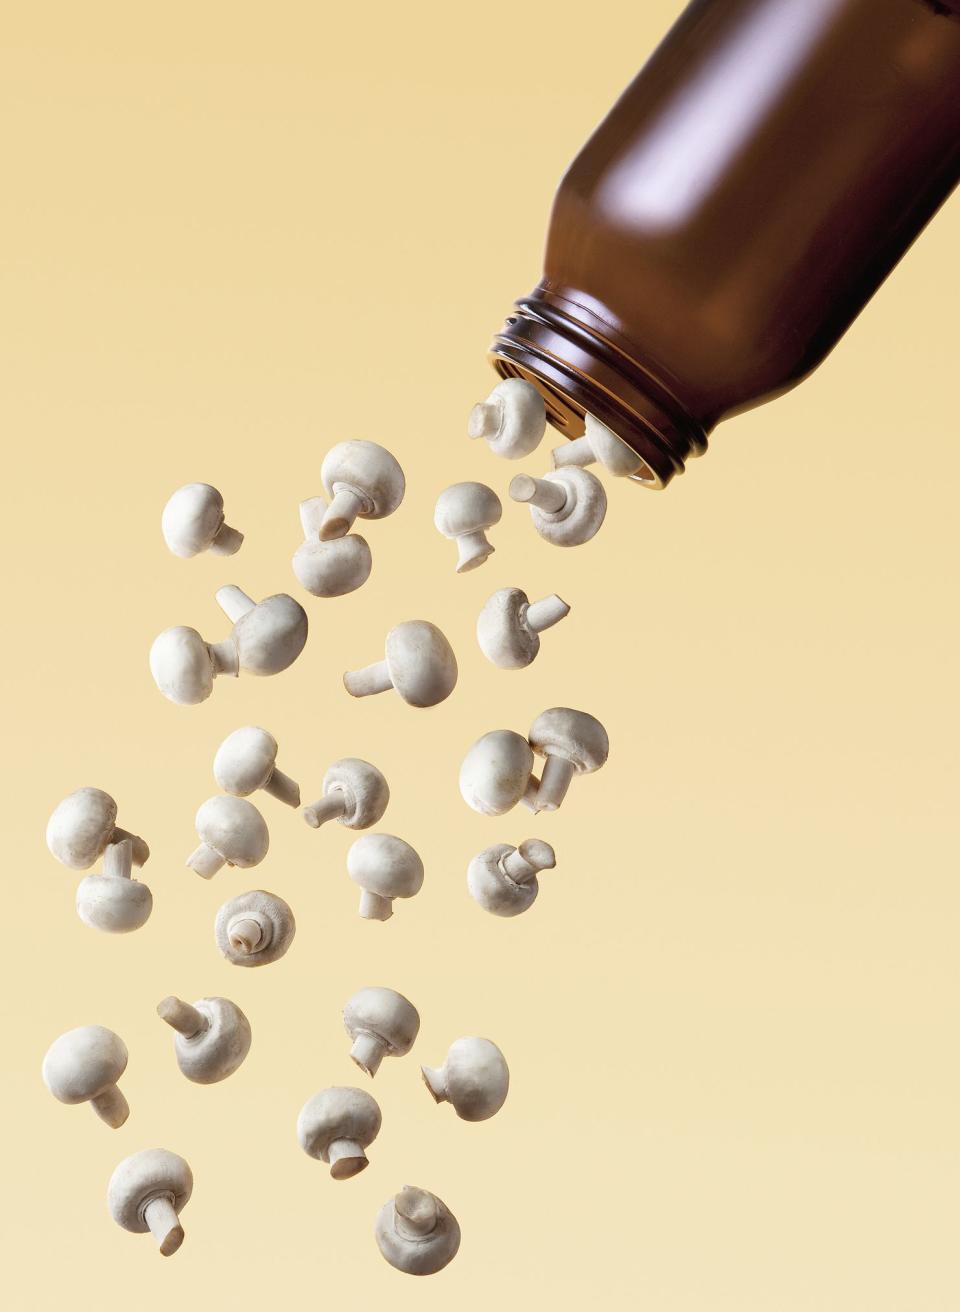 5 Mushroom Supplements That Are Actually Worth Buying